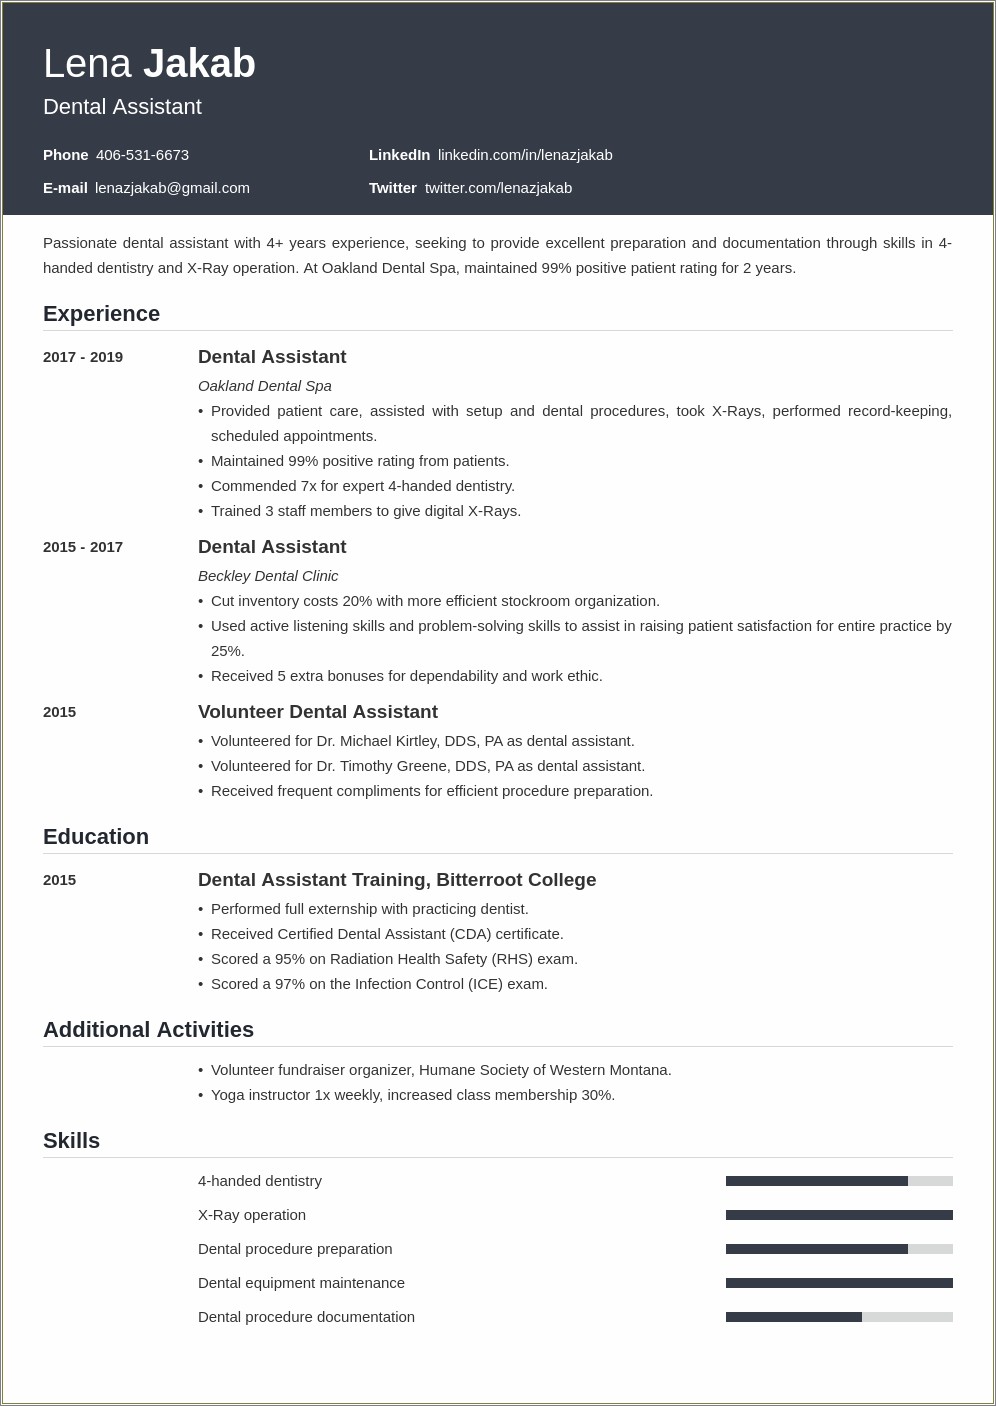 Dental Assistant Professional Summary For Resume